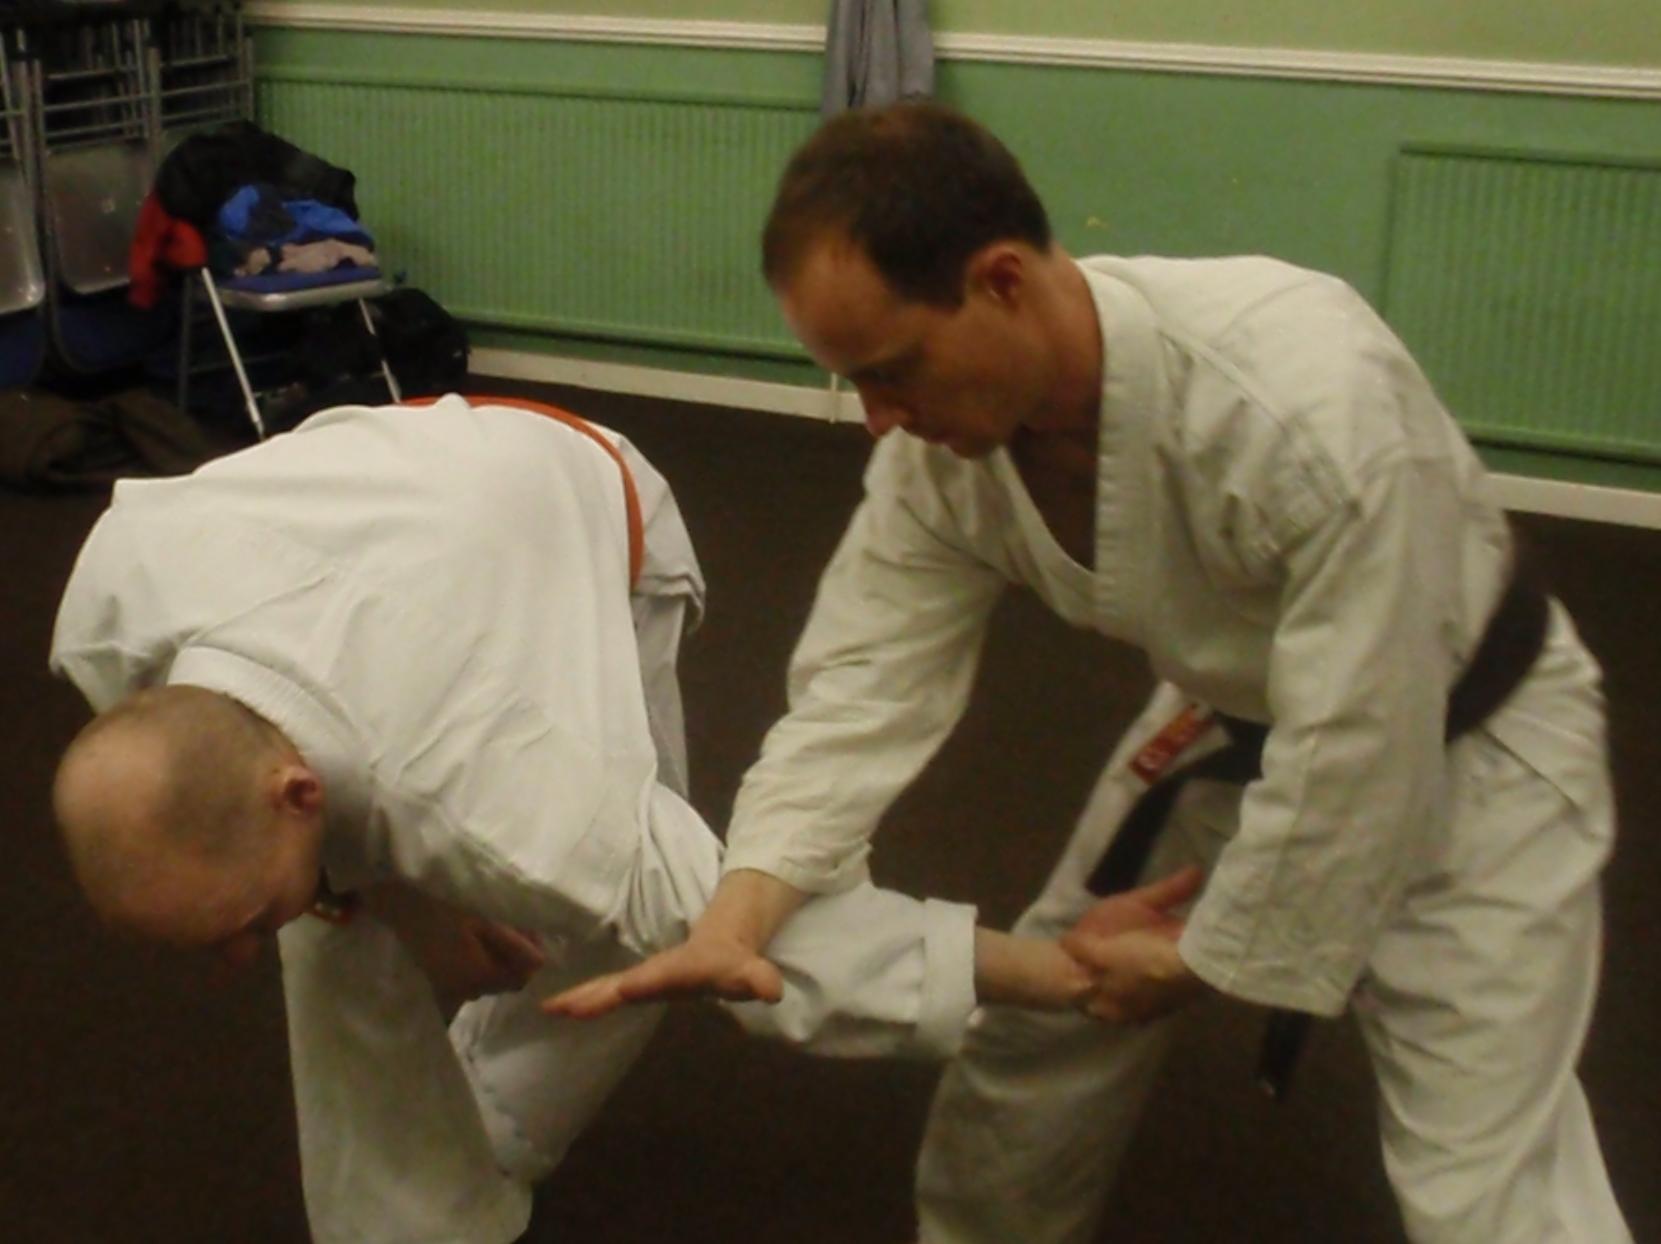 A joint-lock/takedown taught by Funakoshi in the 1920's